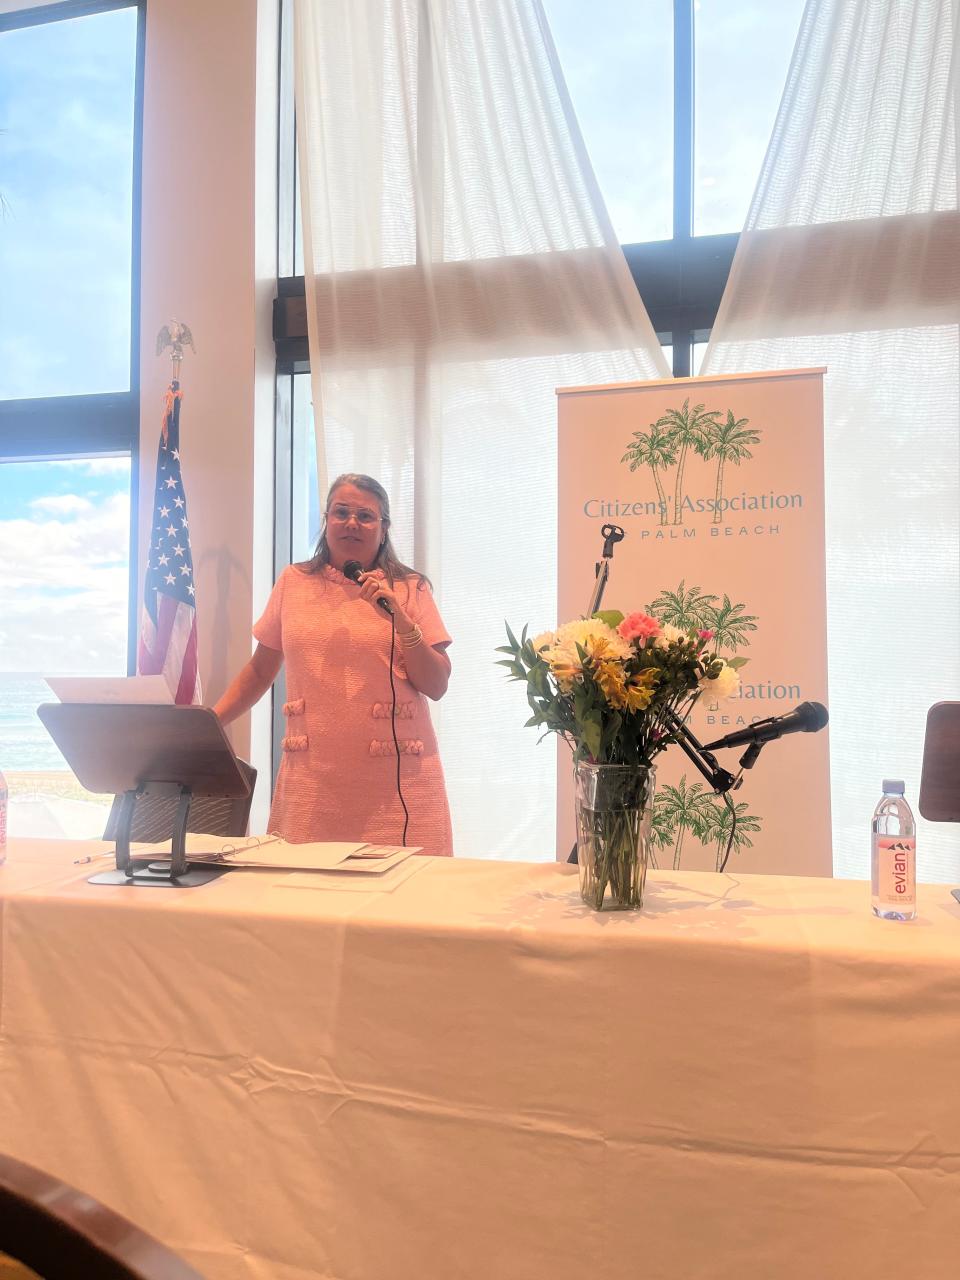 Palm Beach Town Council candidate Bridget Moran speaking at the Feb. 22 candidate forum organized by the Citizens' Association of Palm Beach.